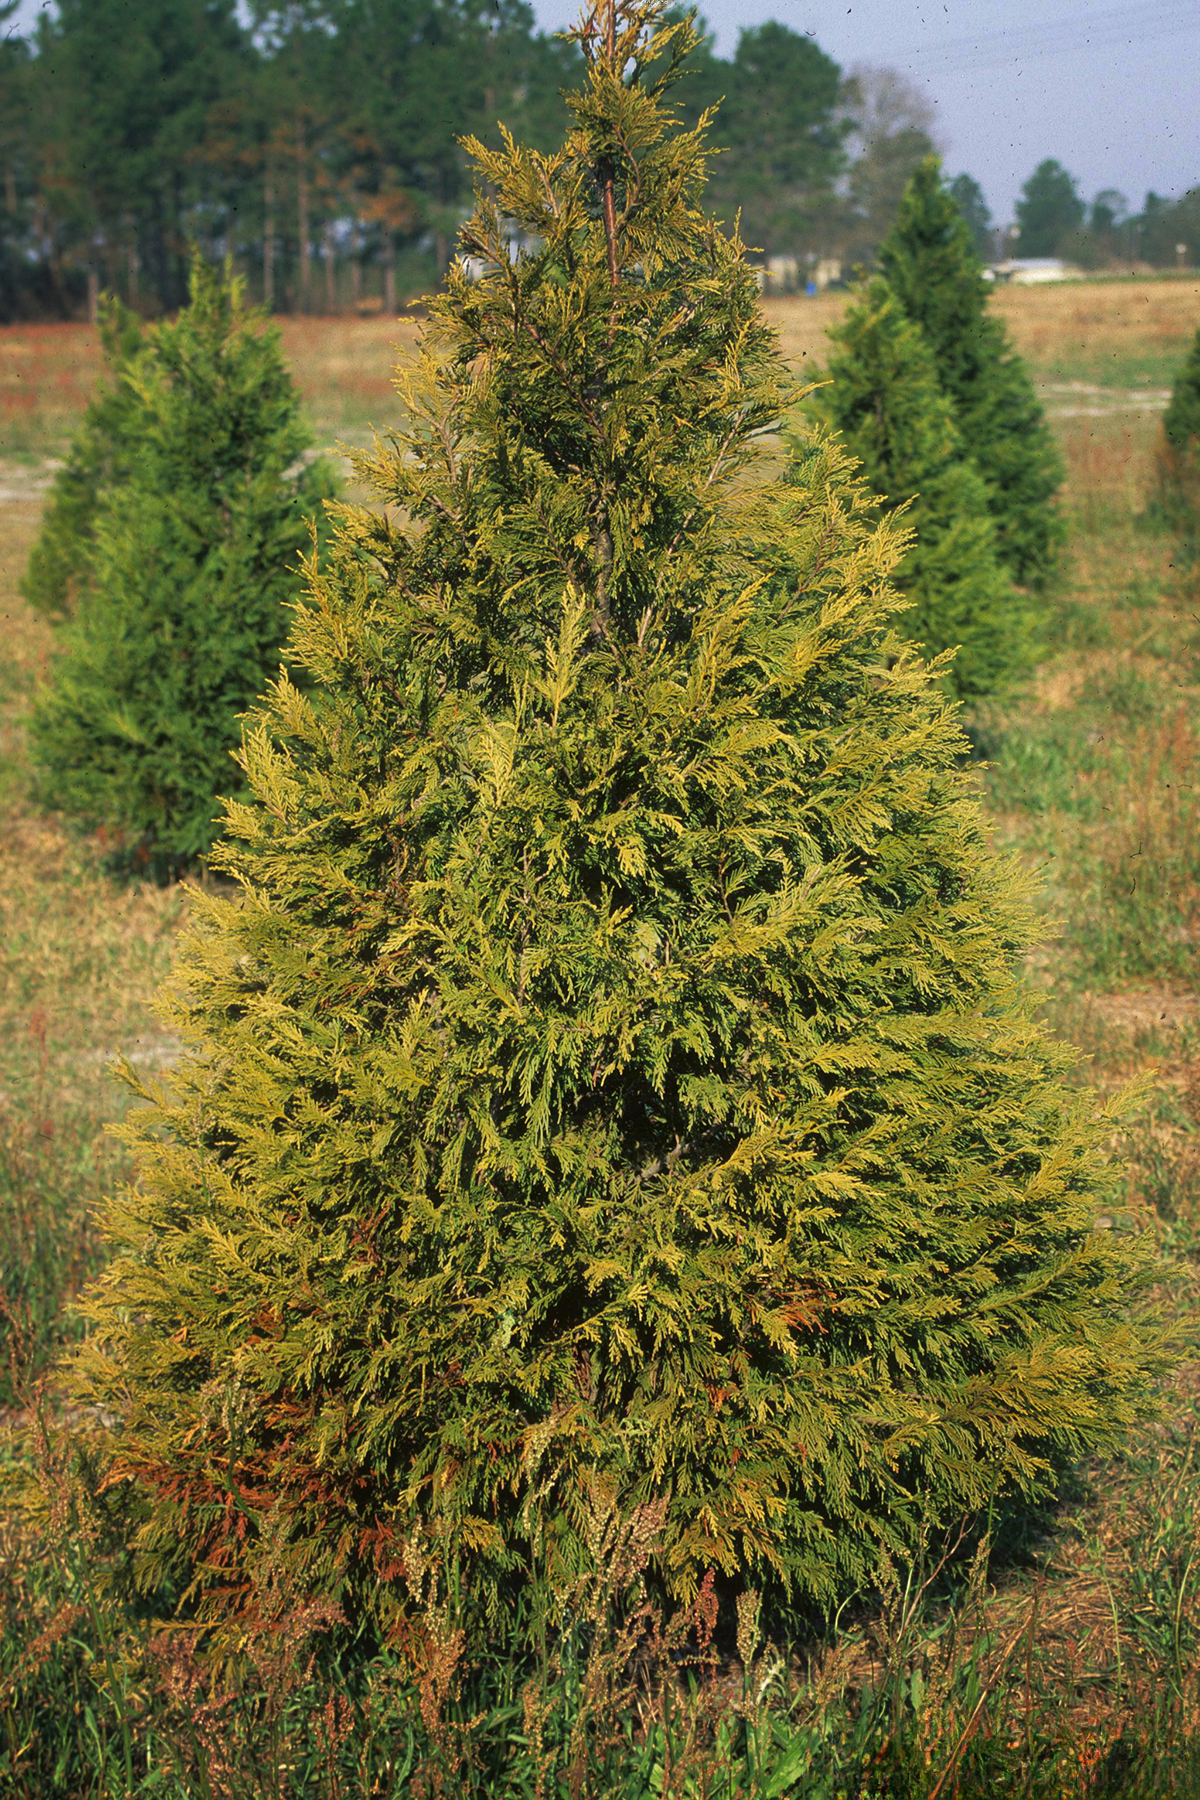 A Christmas tree with yellowish leaves growing among healthy trees.